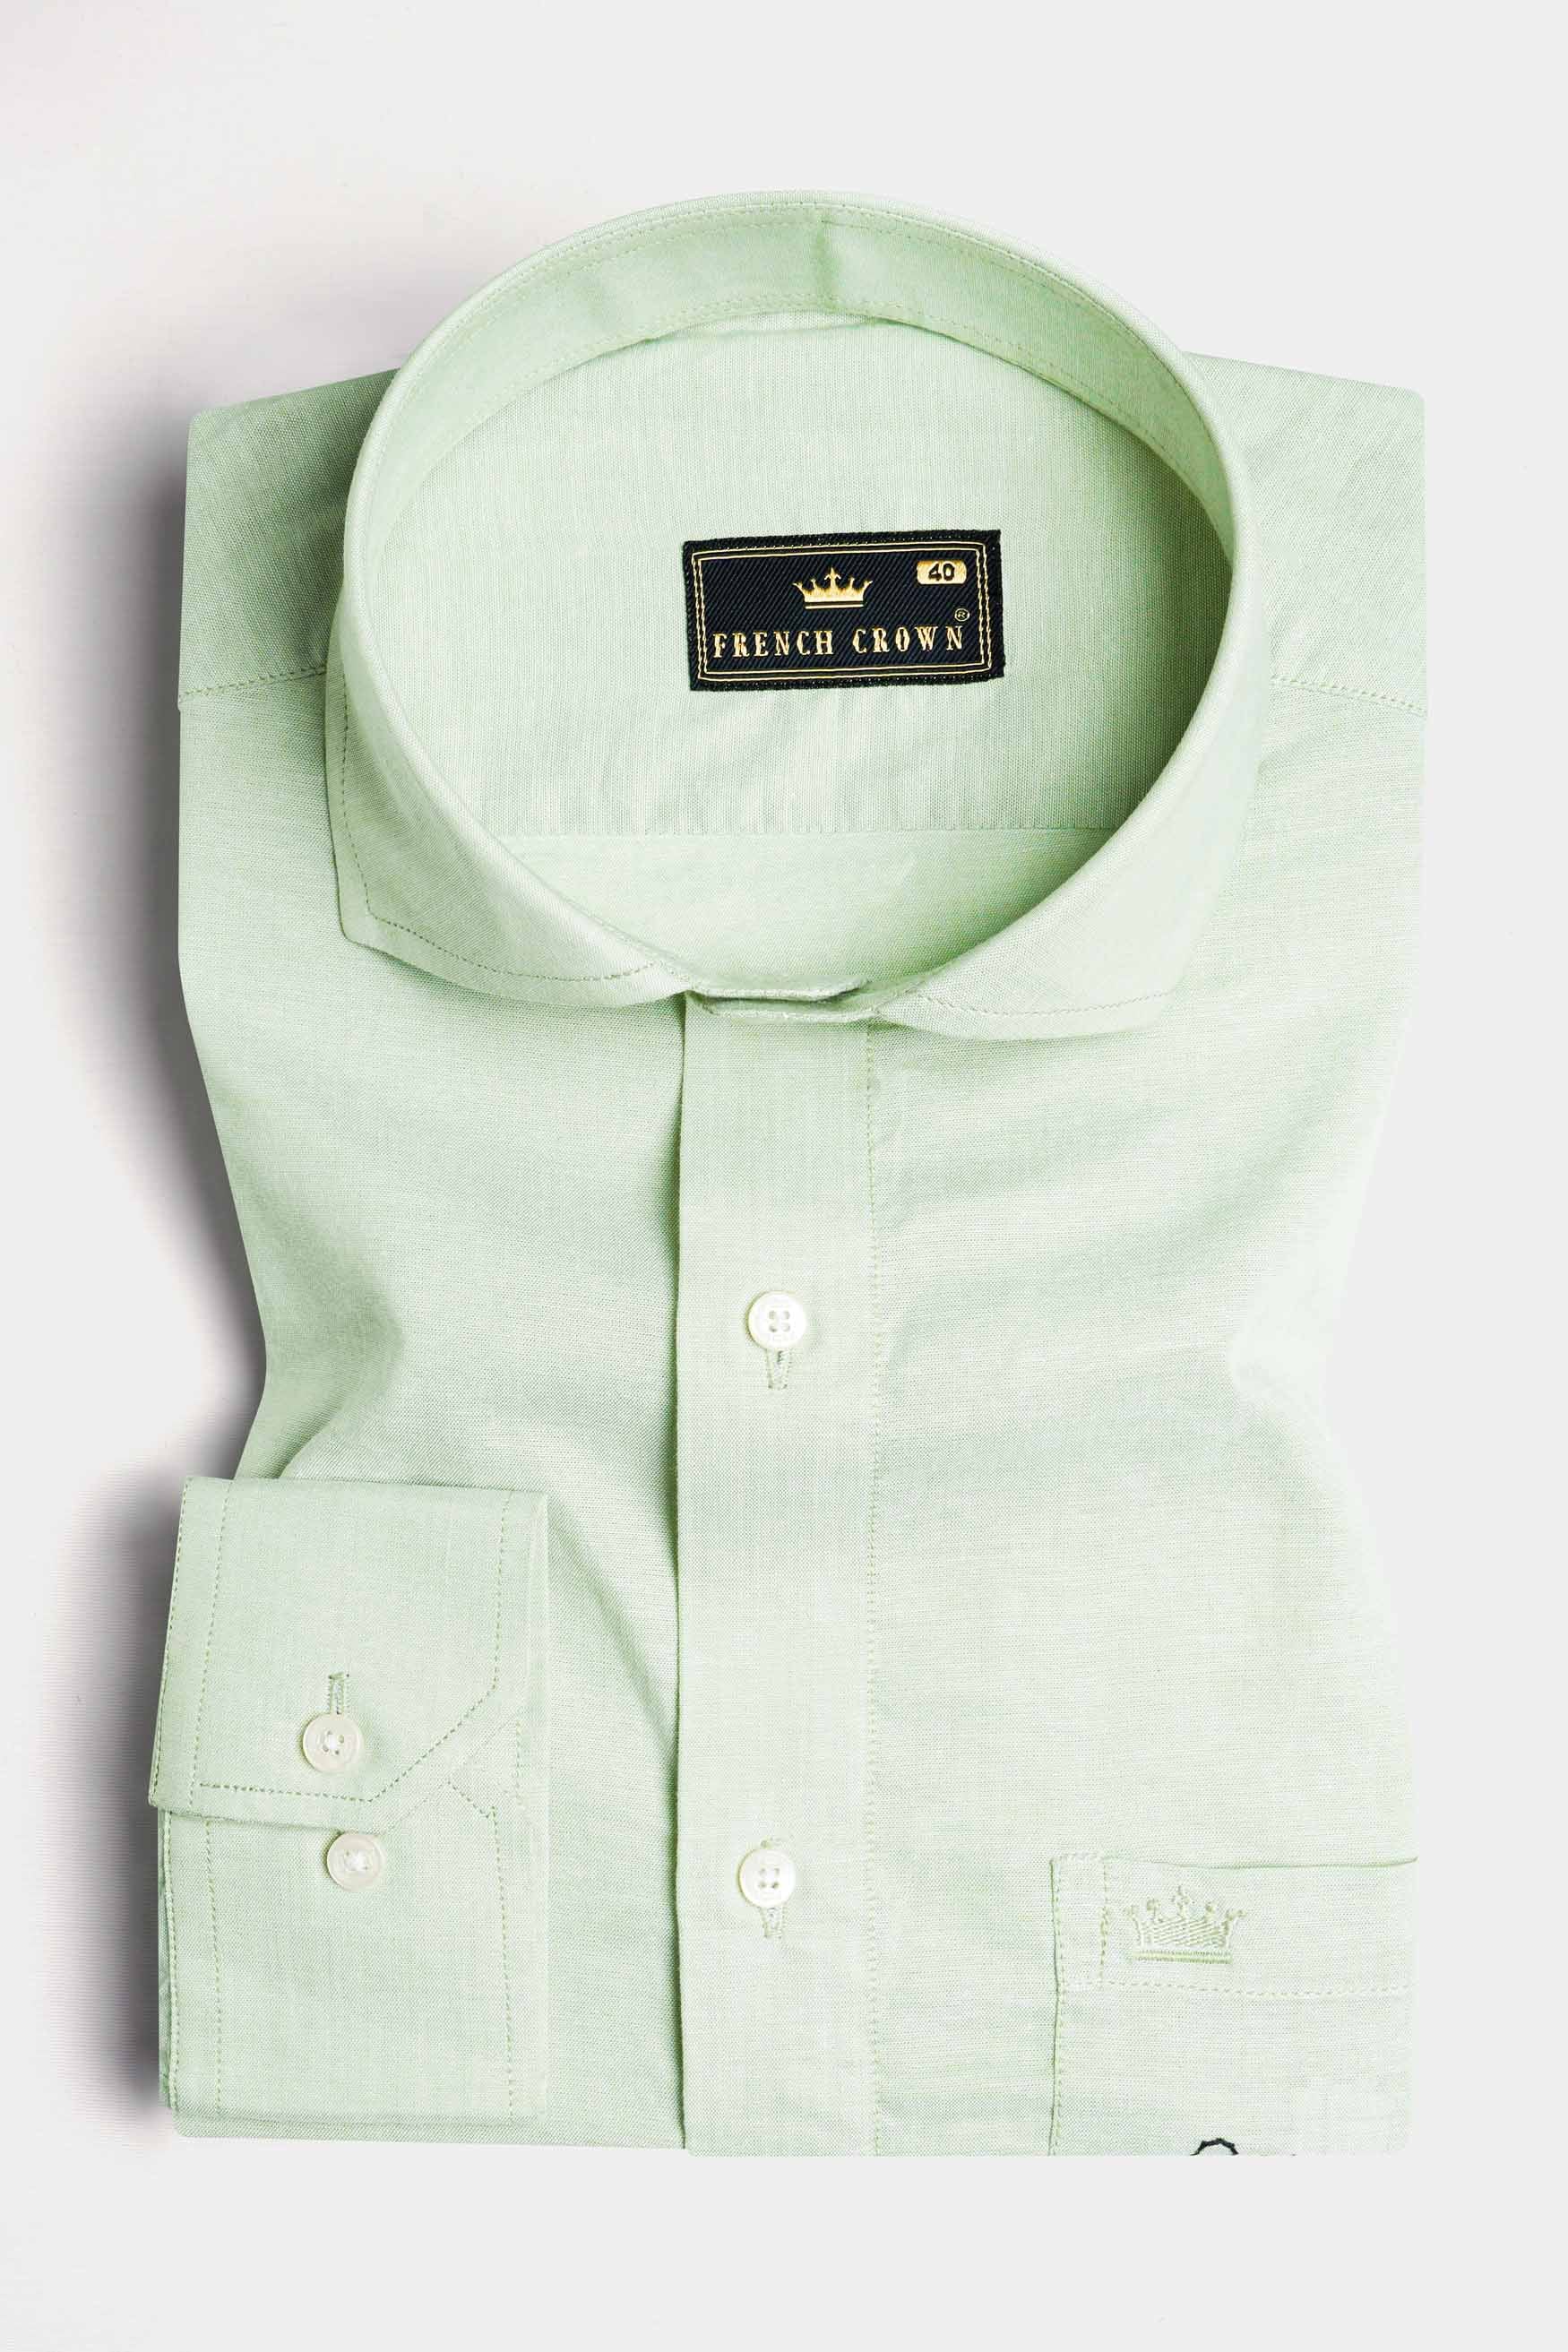 Surf Crest Green Funky Embroidered Royal Oxford Designer Shirt 6337-CA-E180-38, 6337-CA-E180-H-38, 6337-CA-E180-39, 6337-CA-E180-H-39, 6337-CA-E180-40, 6337-CA-E180-H-40, 6337-CA-E180-42, 6337-CA-E180-H-42, 6337-CA-E180-44, 6337-CA-E180-H-44, 6337-CA-E180-46, 6337-CA-E180-H-46, 6337-CA-E180-48, 6337-CA-E180-H-48, 6337-CA-E180-50, 6337-CA-E180-H-50, 6337-CA-E180-52, 6337-CA-E180-H-52